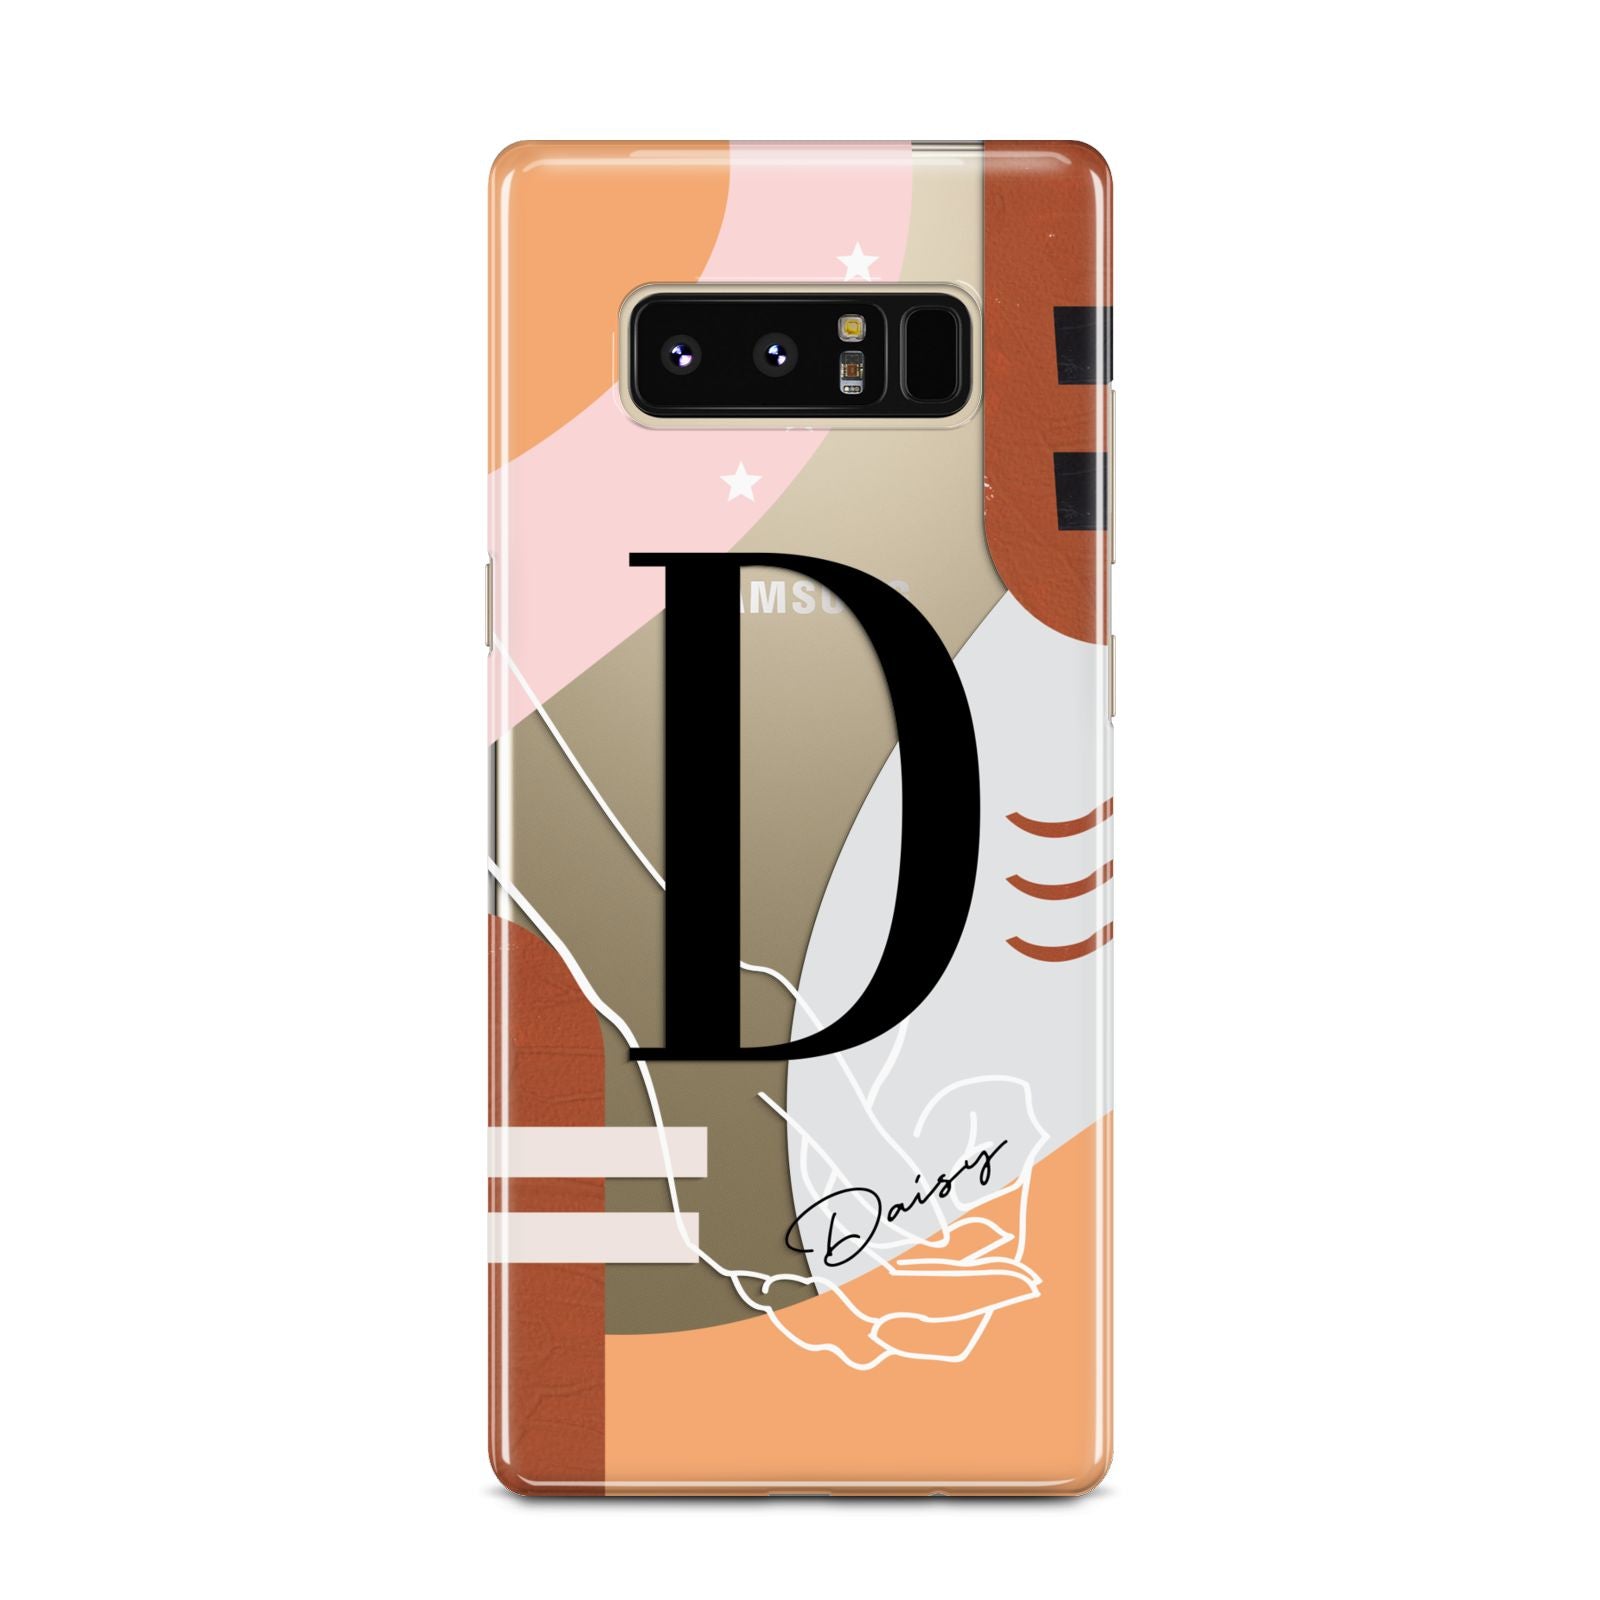 Personalised Abstract Samsung Galaxy Note 8 Case